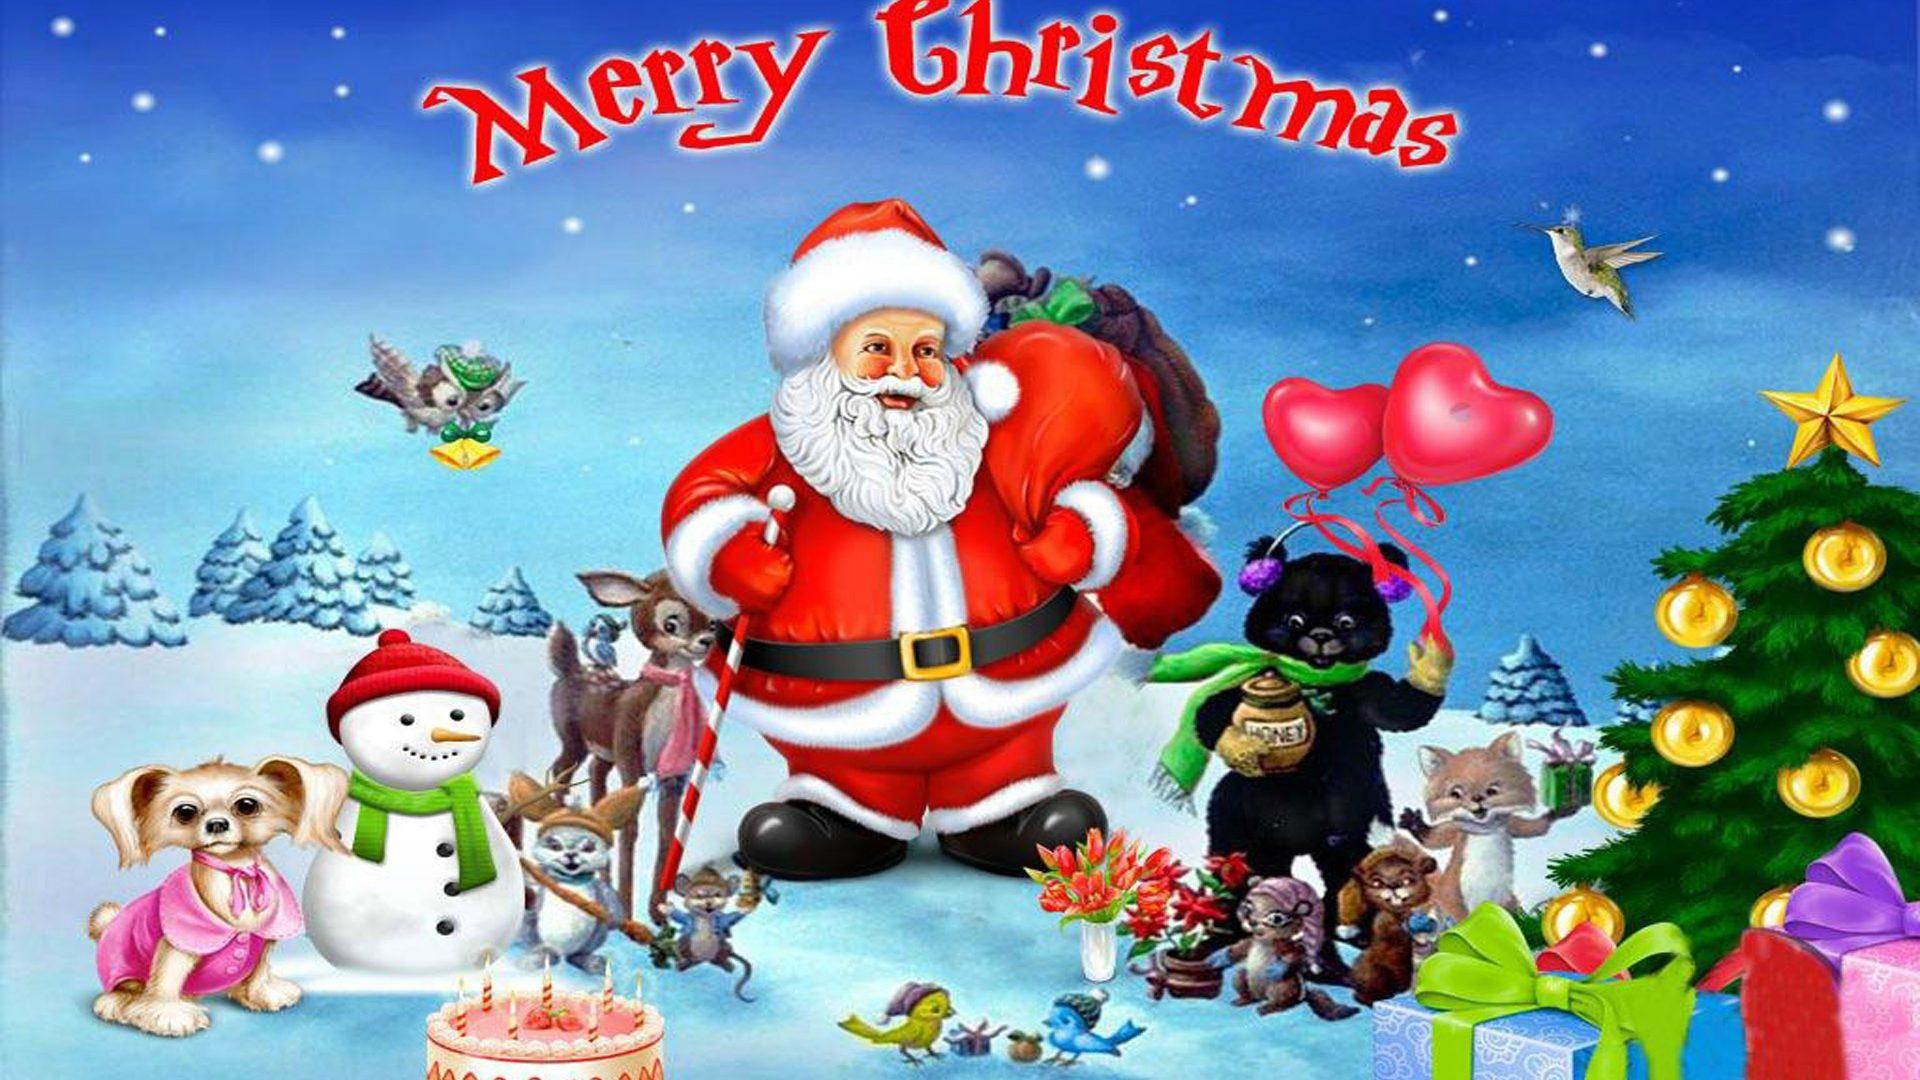 Merry Christmas With Santa Clause With His Merry Friends